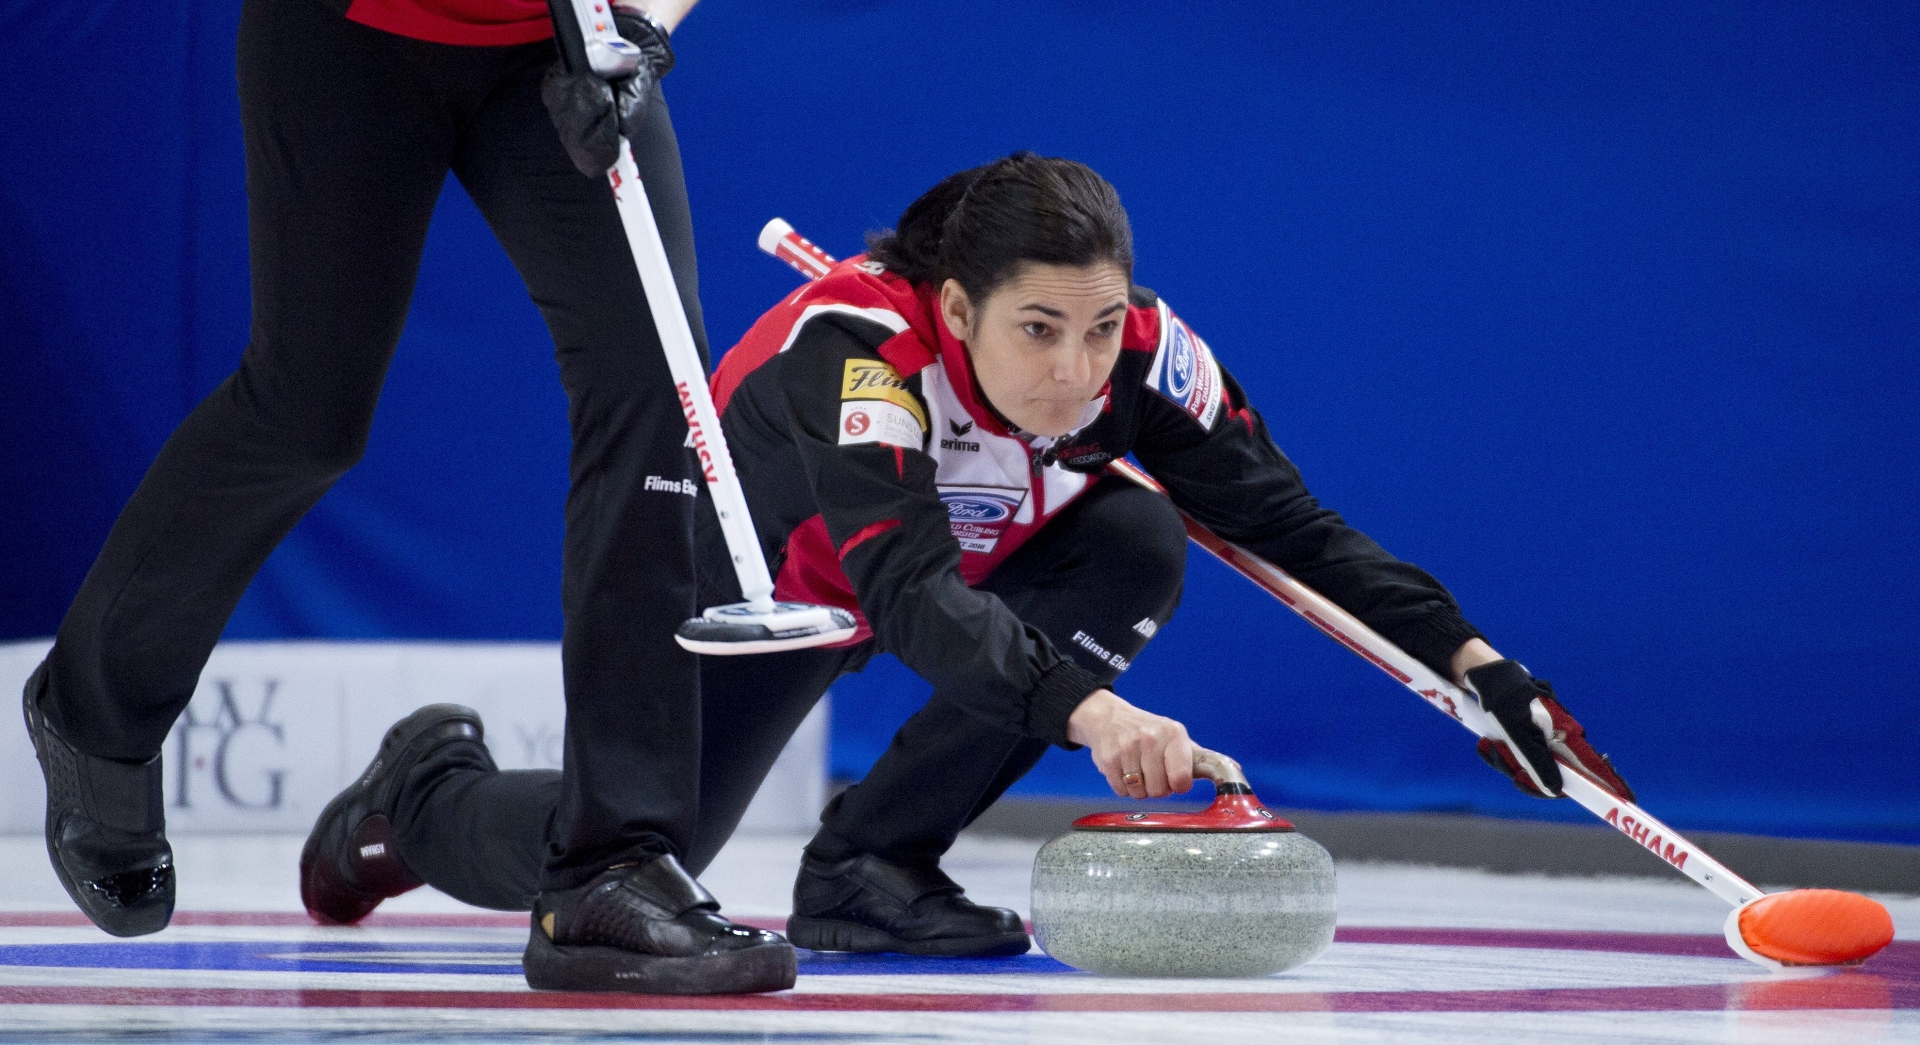 Switzerland skip Binia Feltscher makes a shot during the sixth draw against Finland at the Women's World Curling Championship in Swift Current, Saskatchewan, Monday, March 21, 2016. (Jonathan Hayward/The Canadian Press via AP) MANDATORY CREDIT